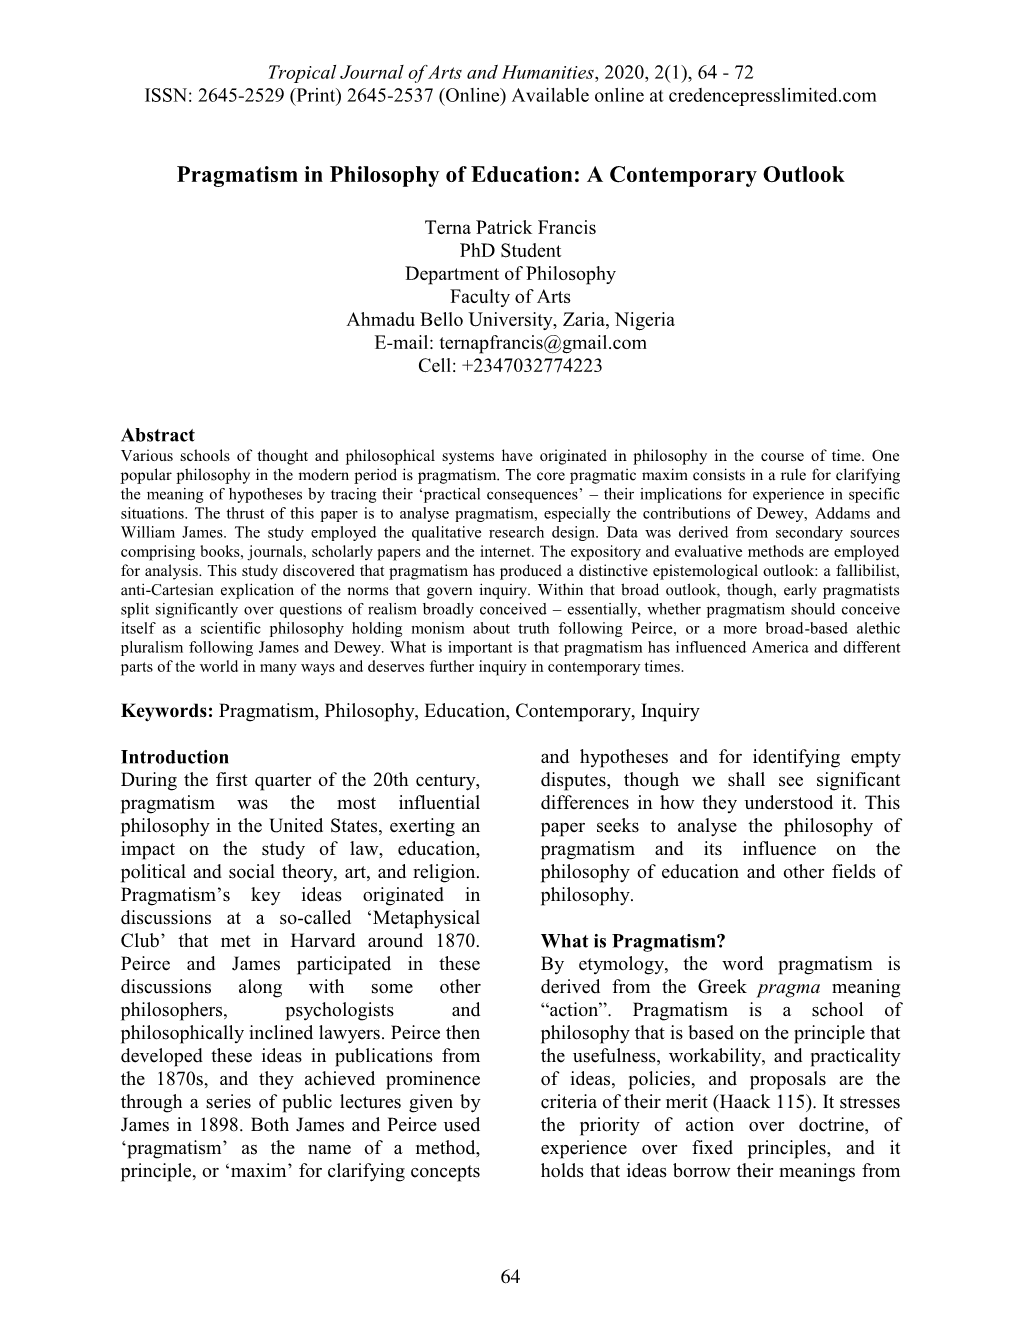 Pragmatism in Philosophy of Education: a Contemporary Outlook